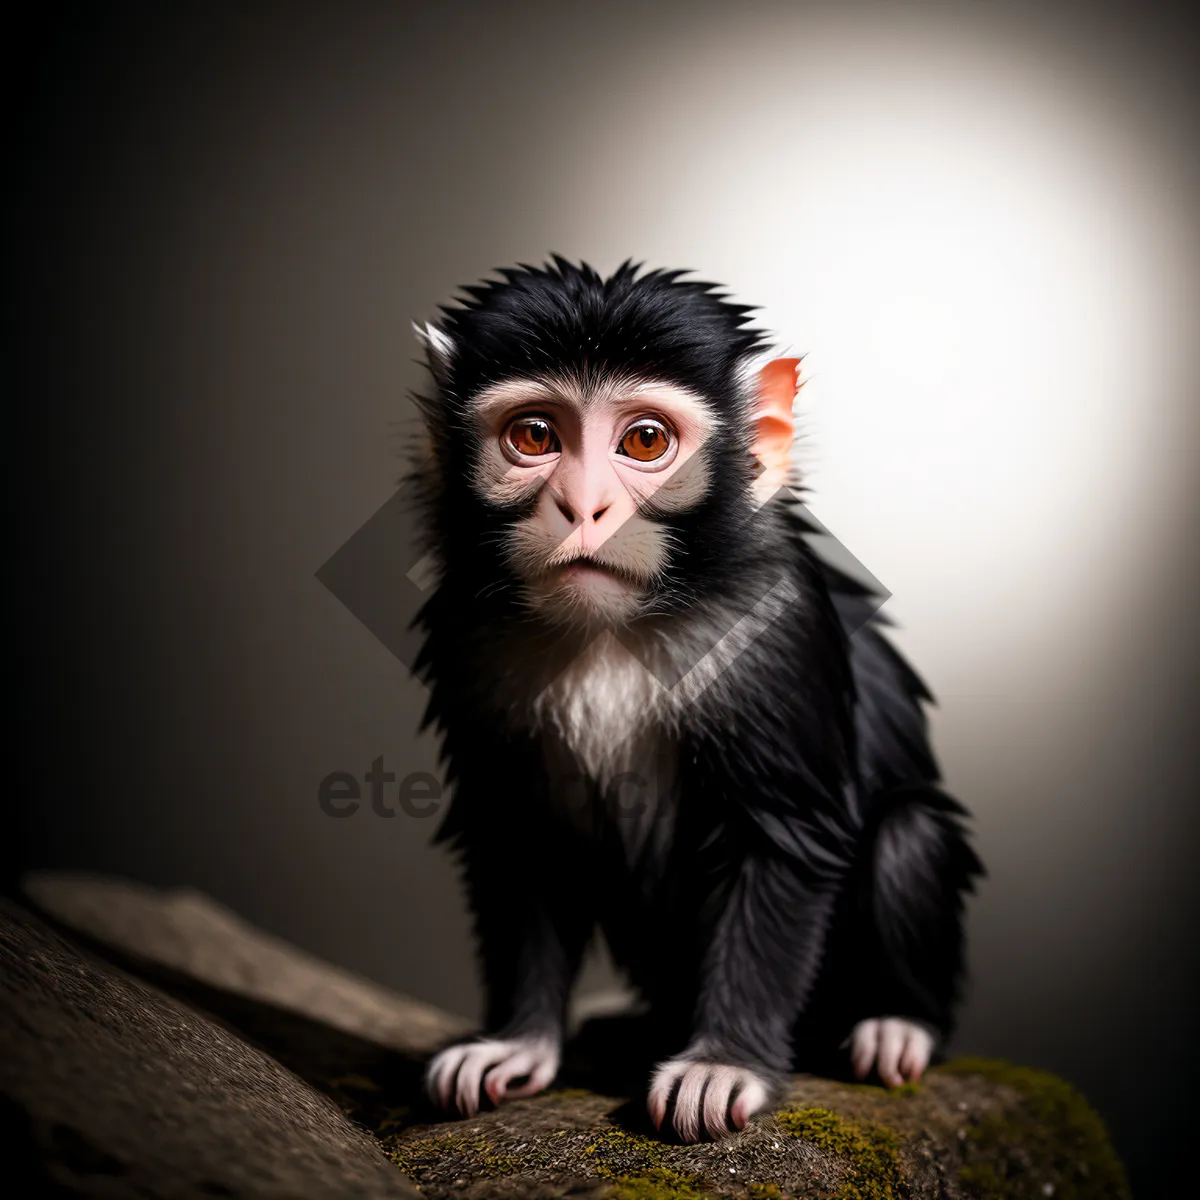 Picture of Cute Baby Monkey Portrait with Lush Black Fur